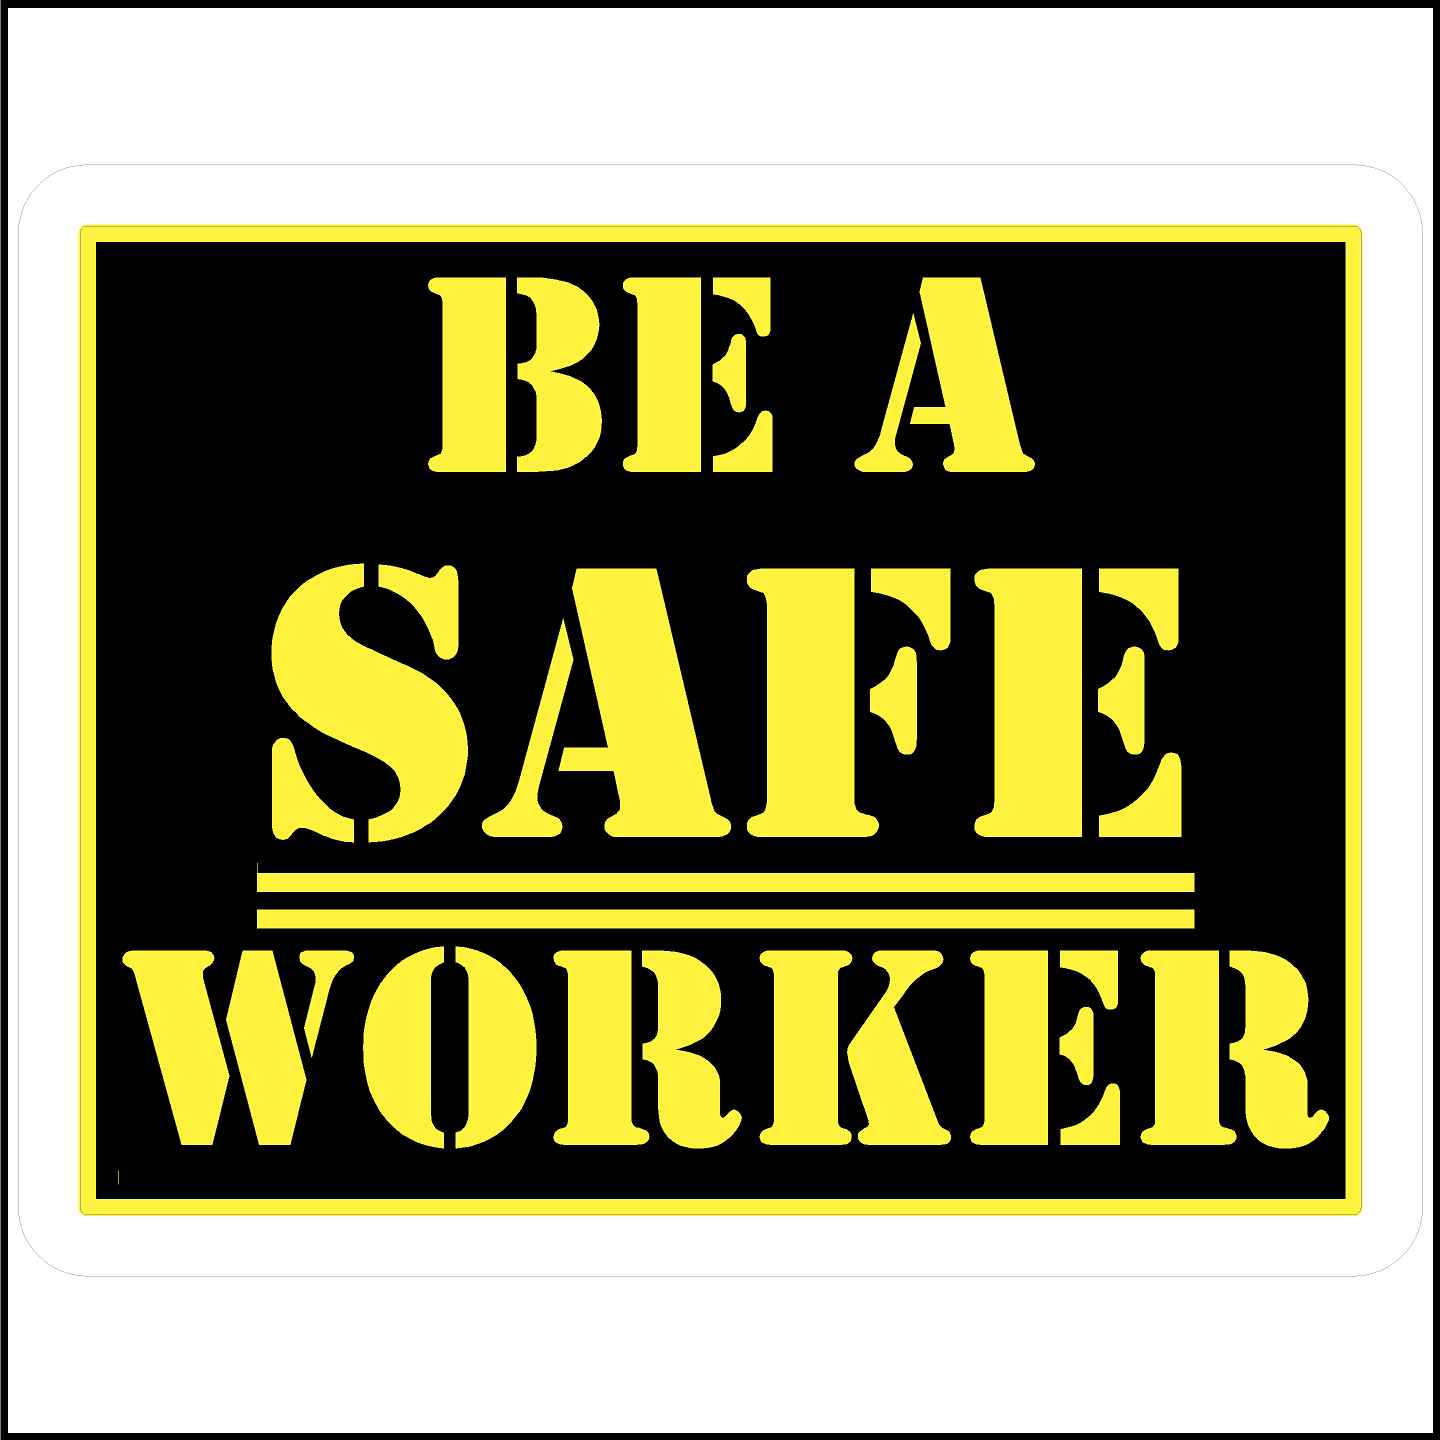 Be A Safe Worker Sticker printed with yellow text on a black background.